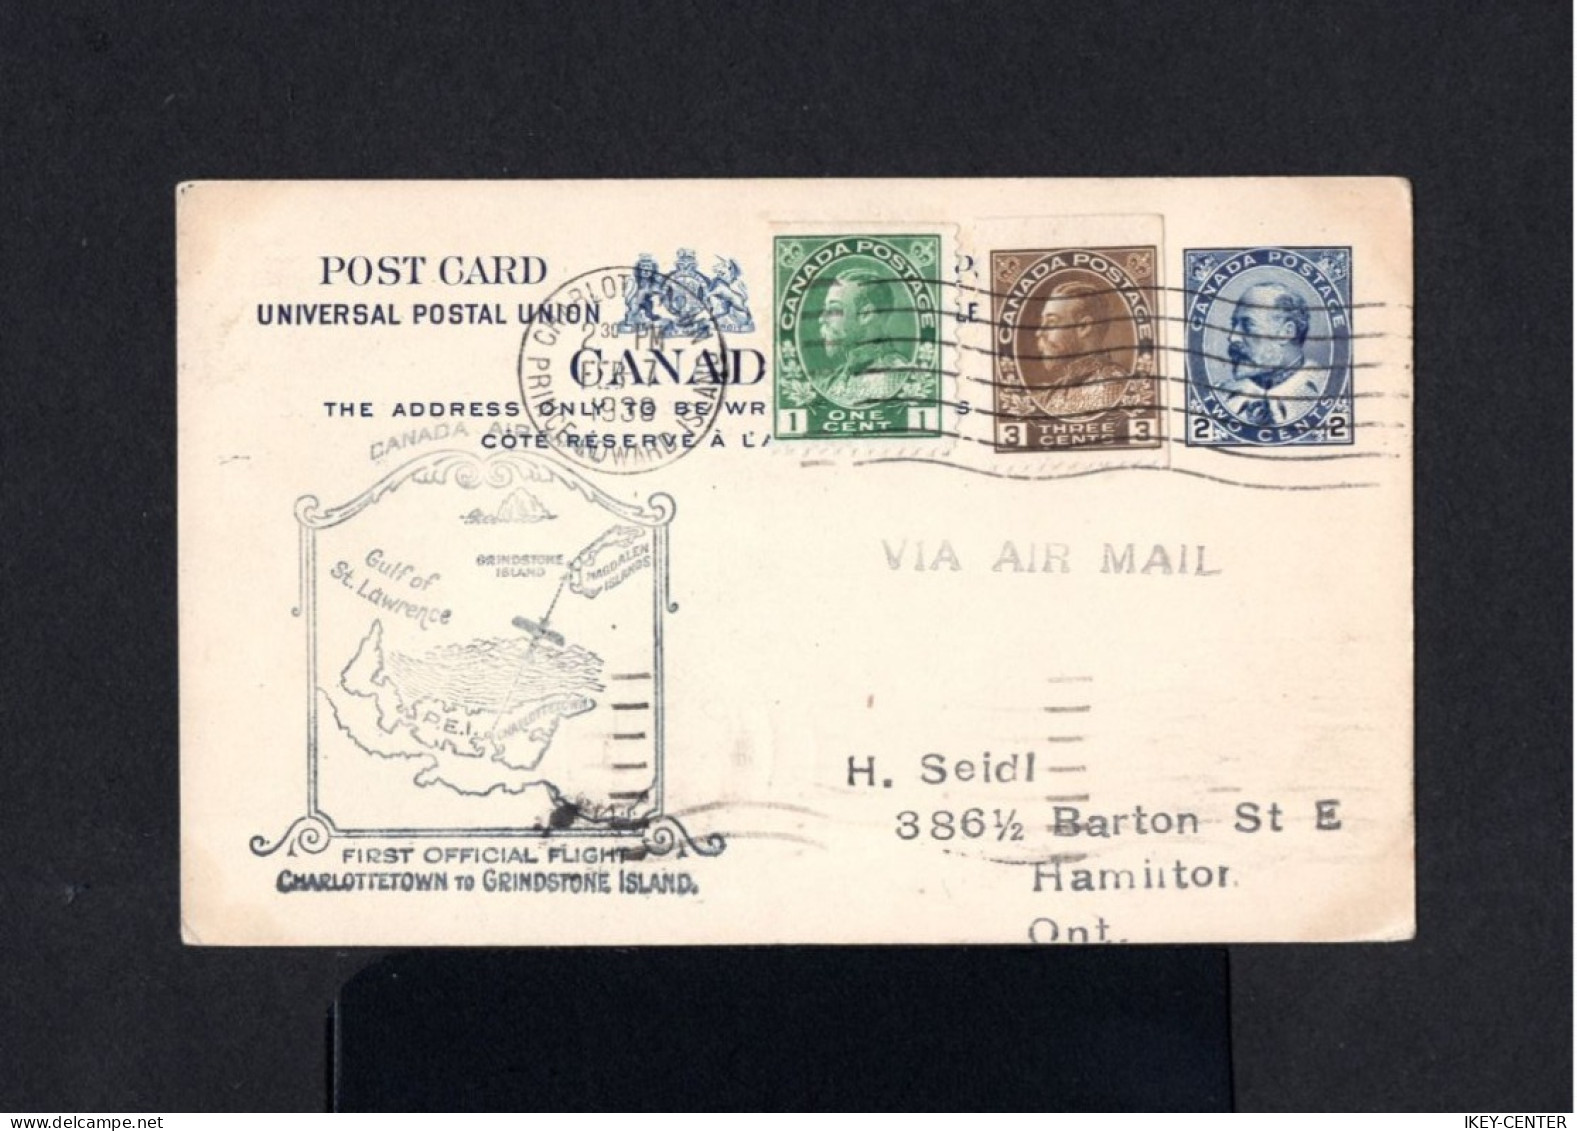 10293-CANADA-AIRMAIL POSTCARD CHARLOTTETOWN To HAMILTON (ontario)1933.WWII.CARTE POSTALE.POSTKARTE.First Official Flight - Lettres & Documents